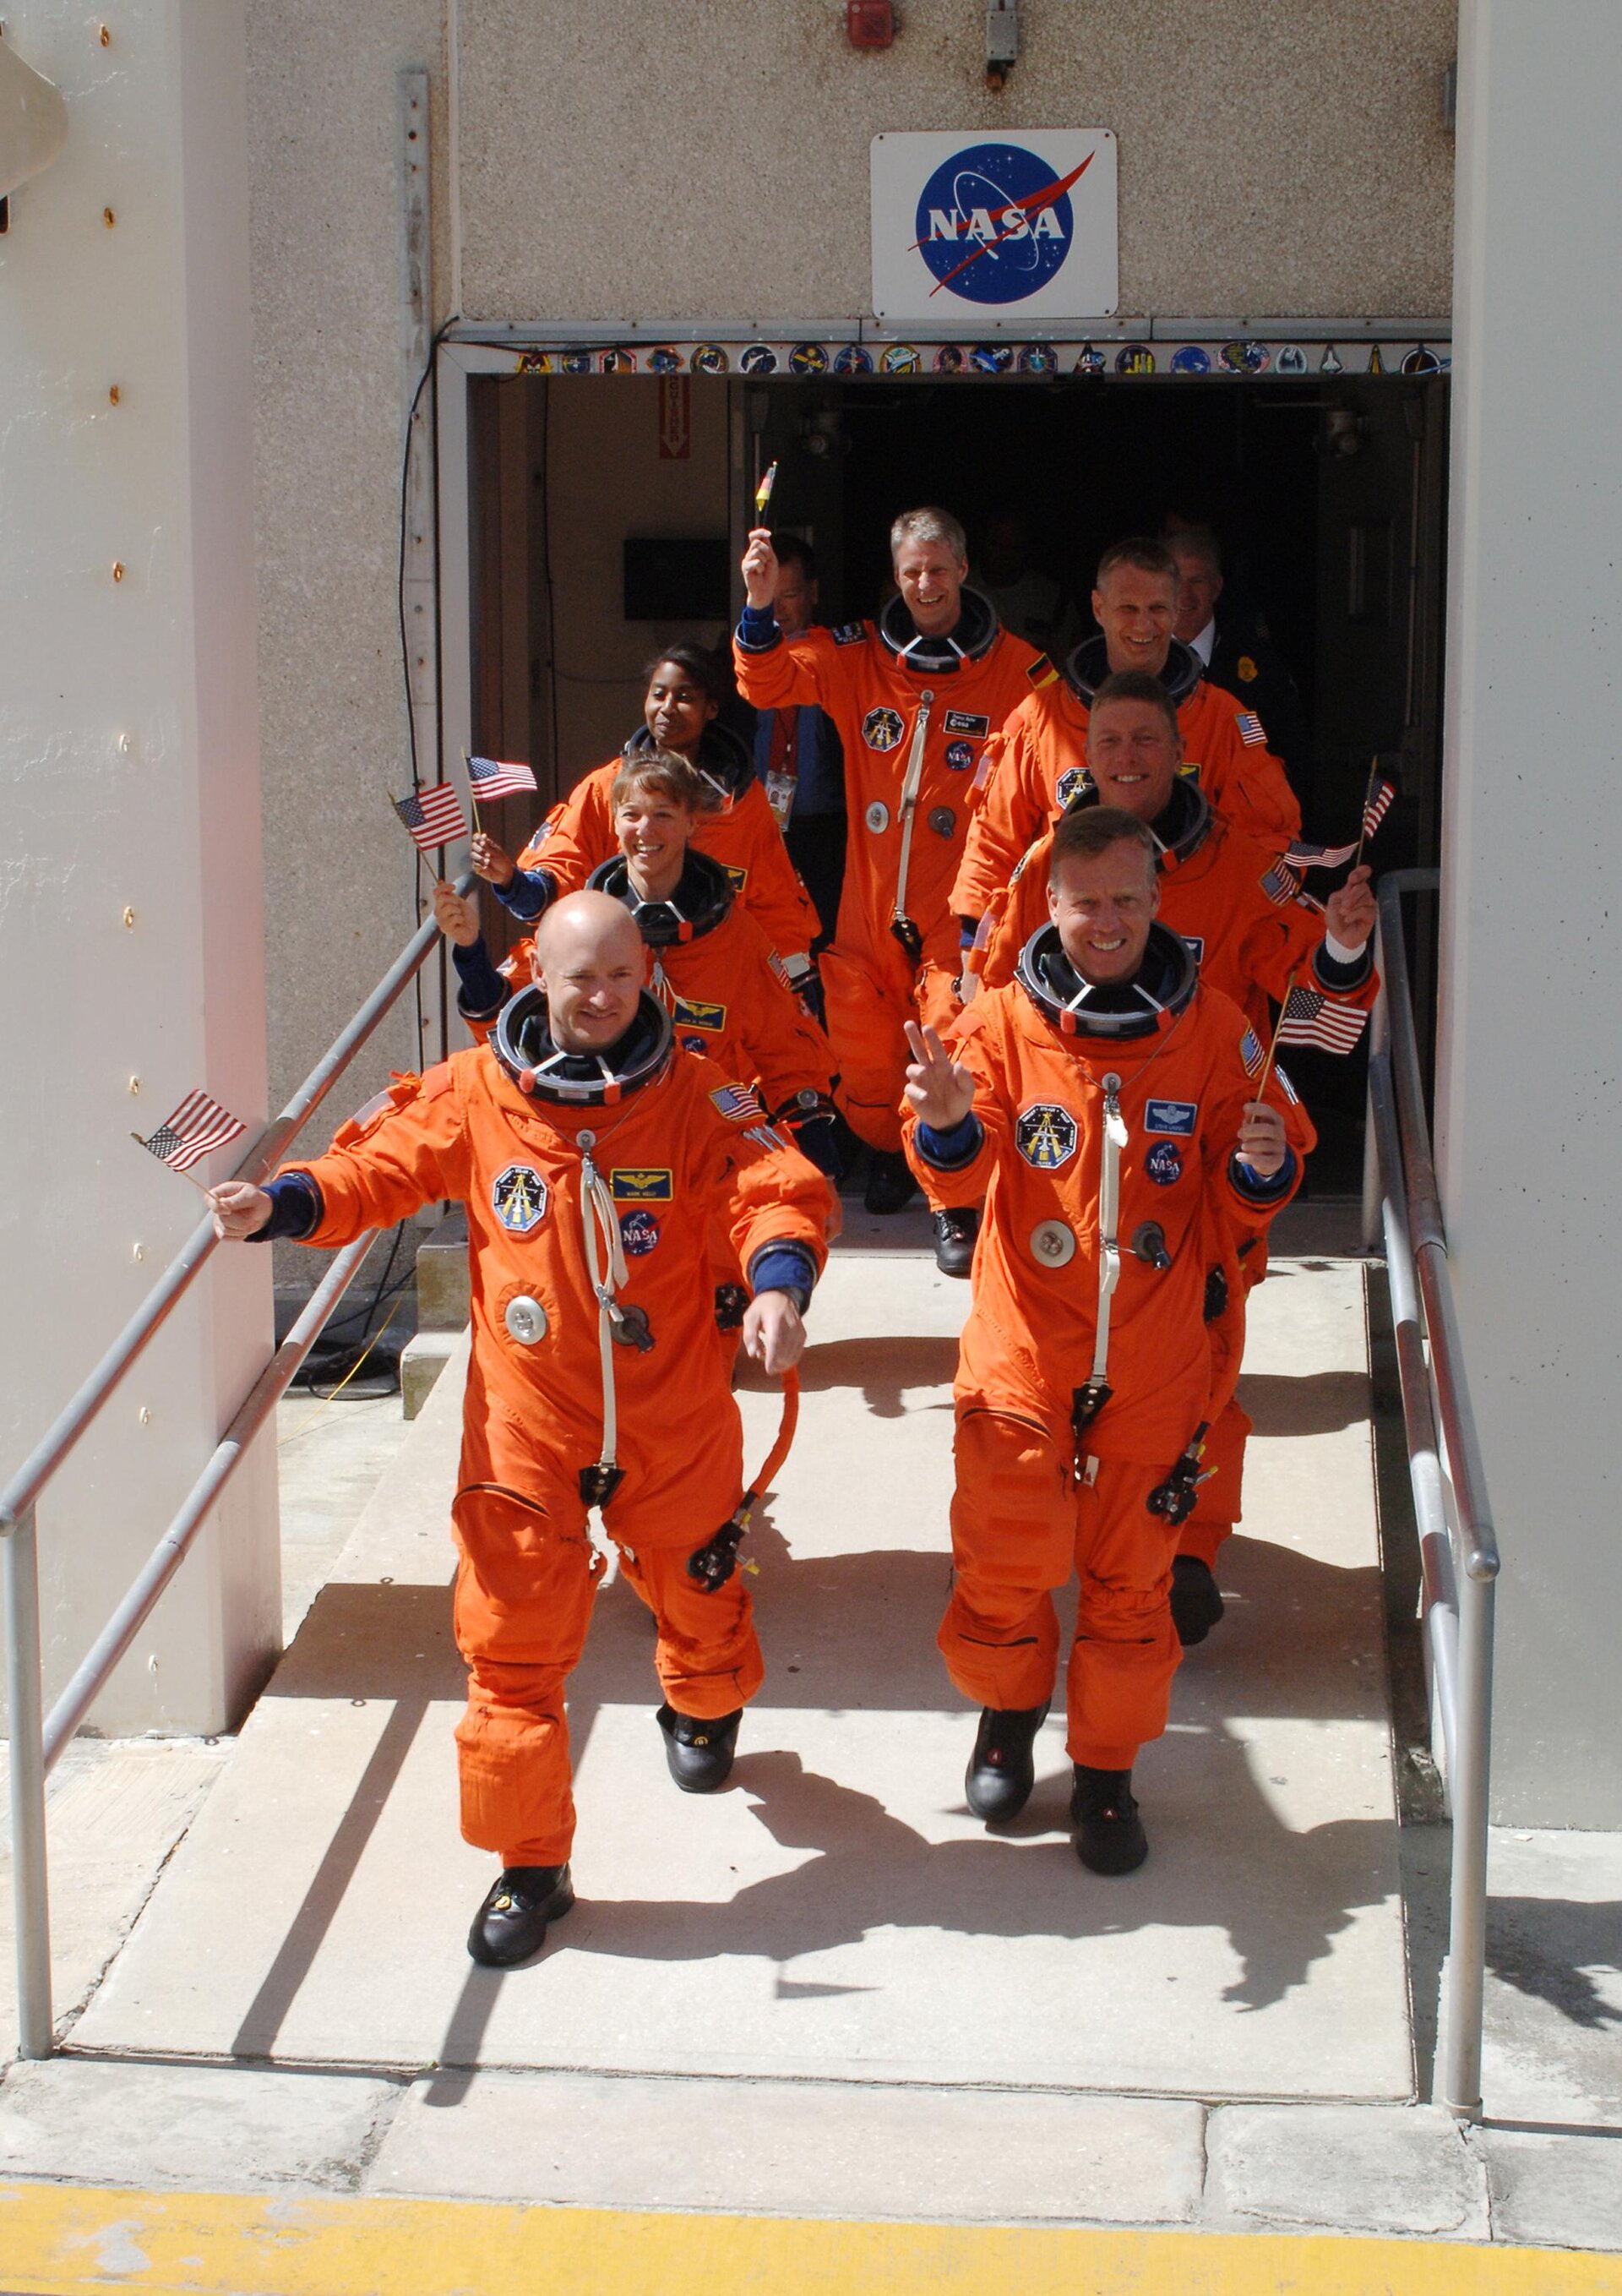 STS-121 crew displays the spirit of the Fourth of July holiday